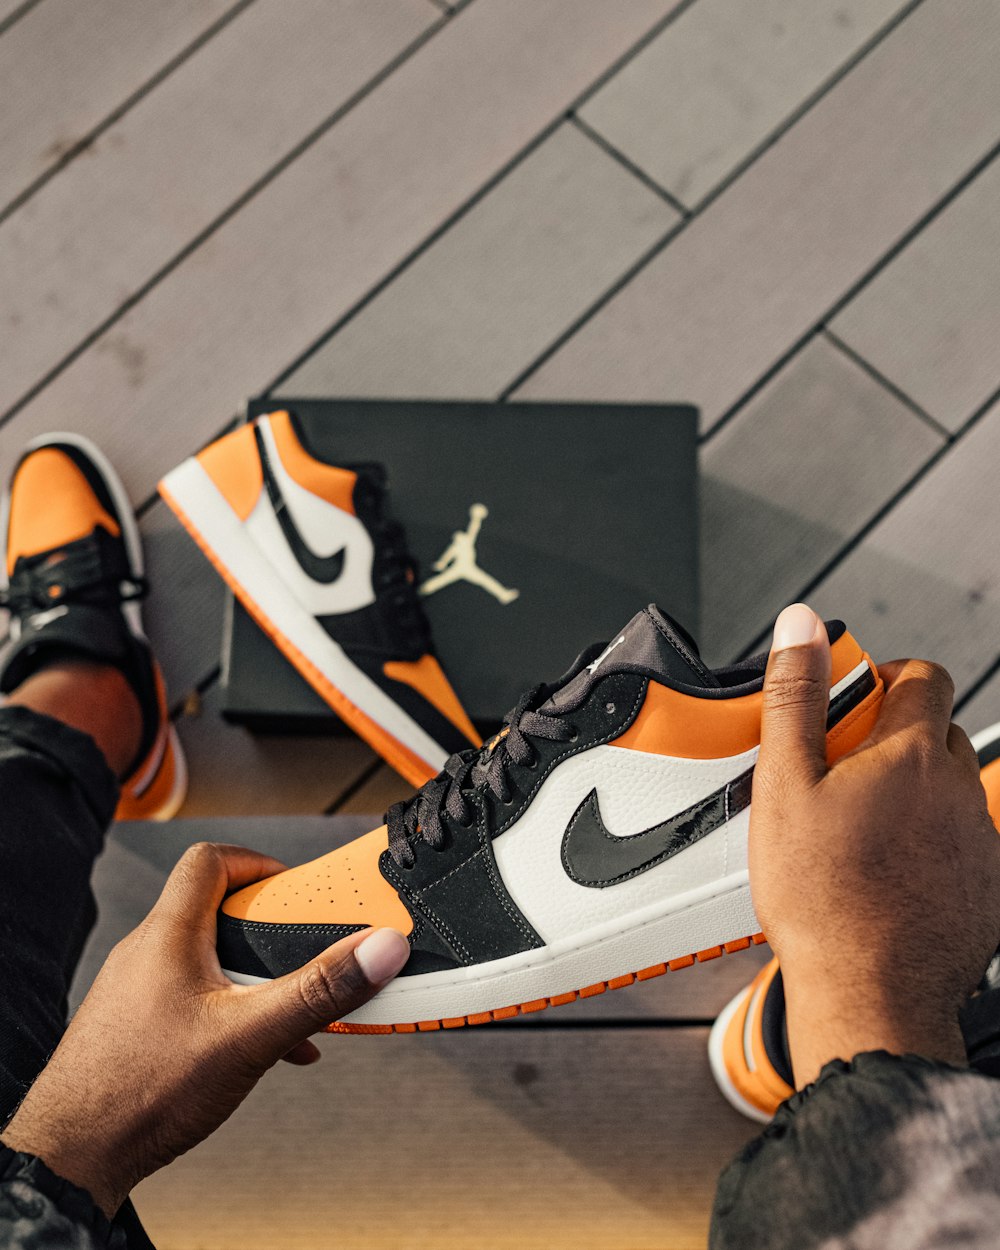 person sitting and holding white, orange, and black Air Jordan 1 low-top sneaker